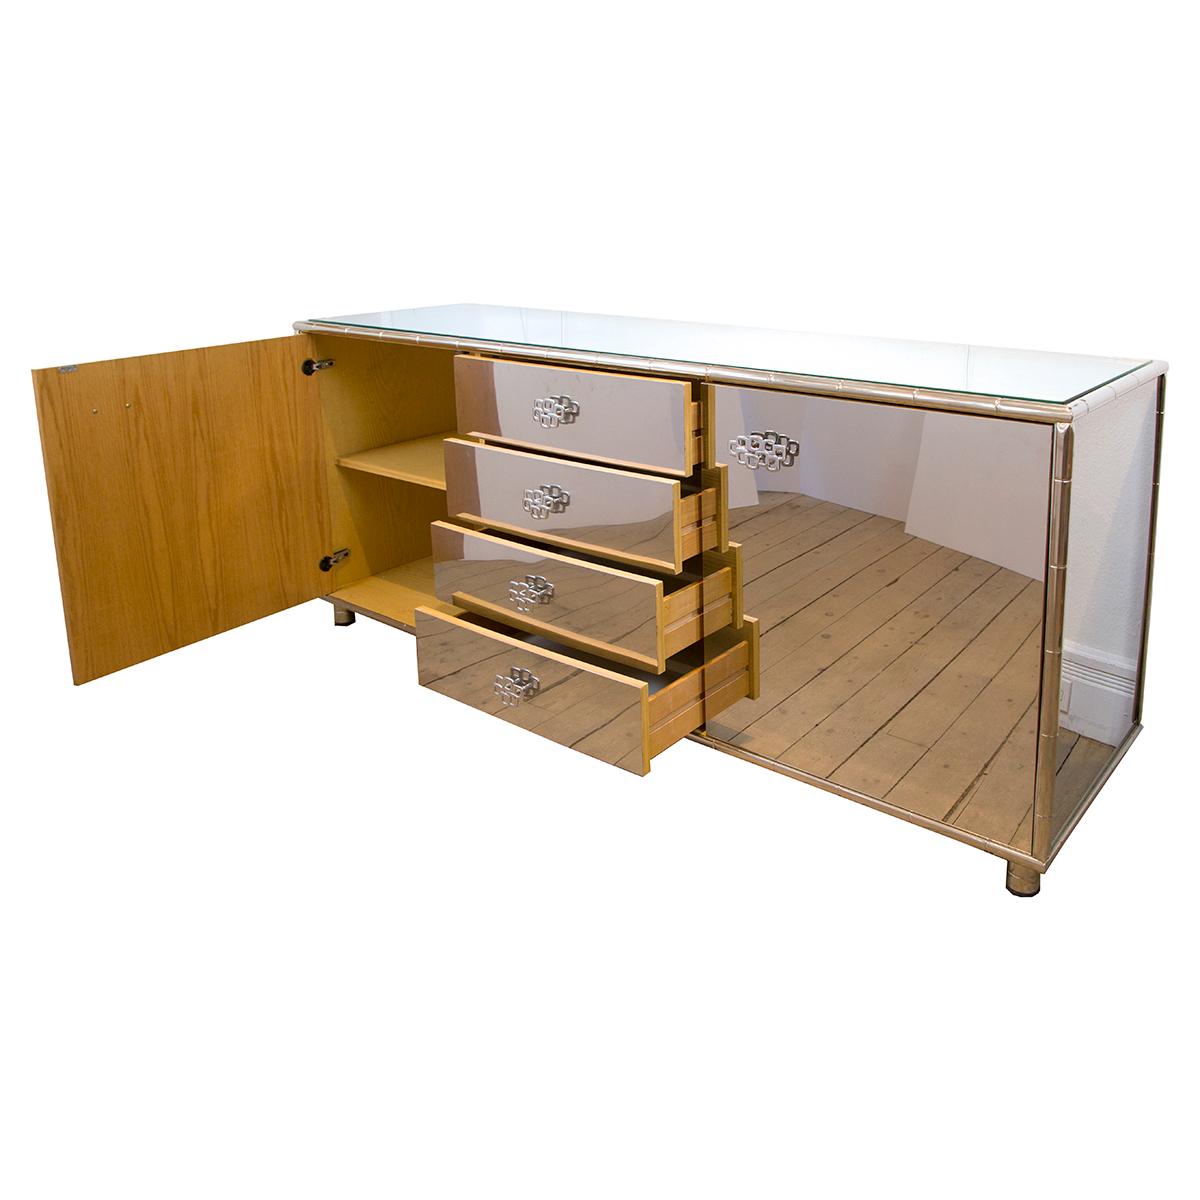 Rectangular stainless steel cabinet with faux bamboo trim, four drawers and interior shelves and with a glass top.